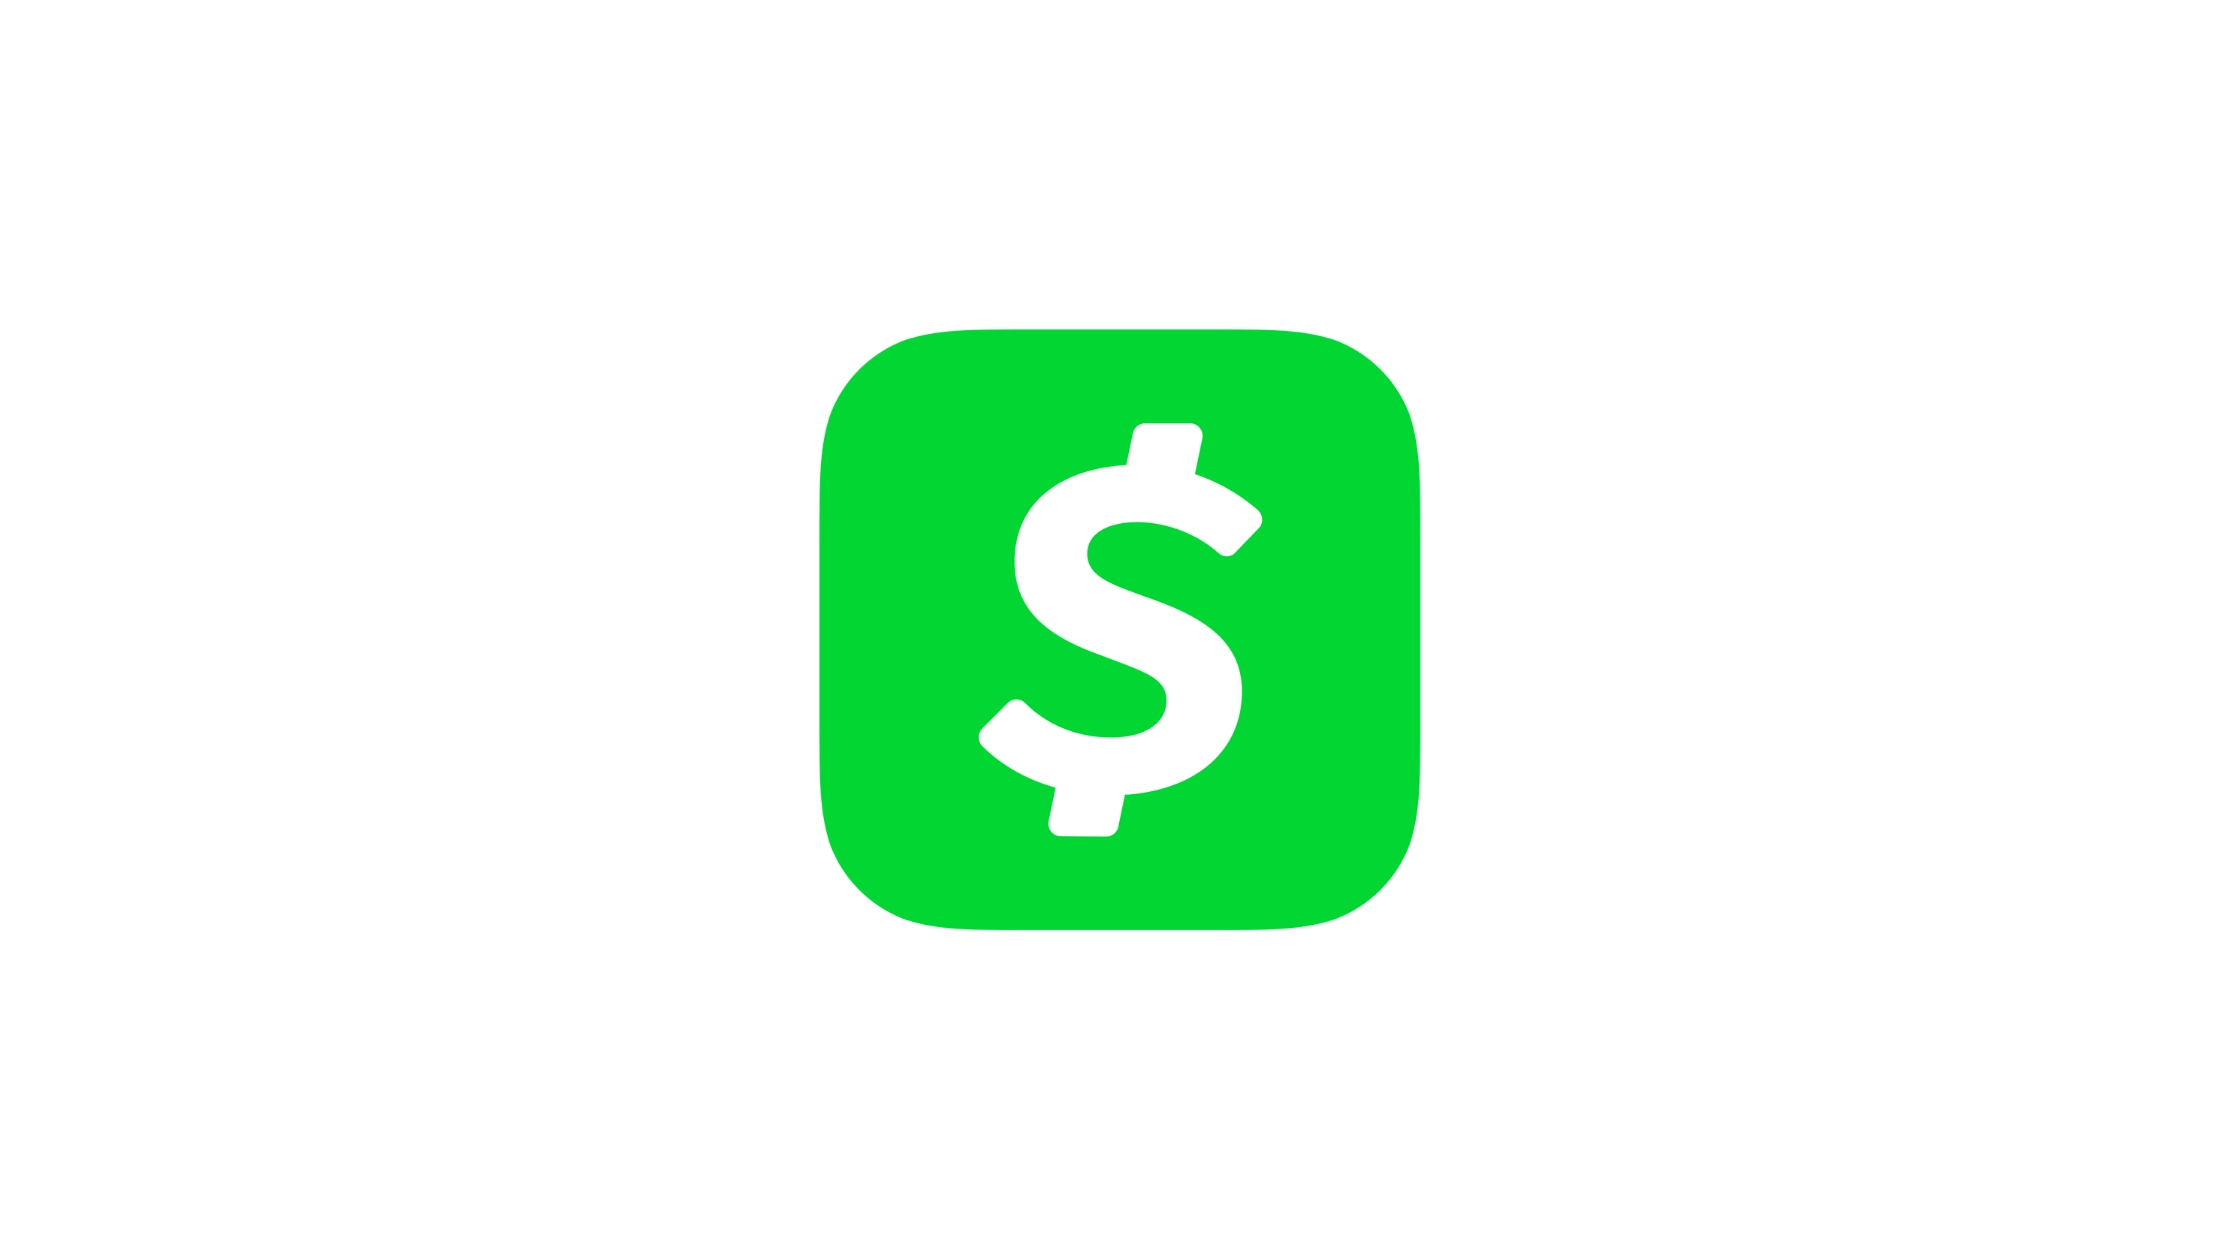 What Font Does Cash App Use?